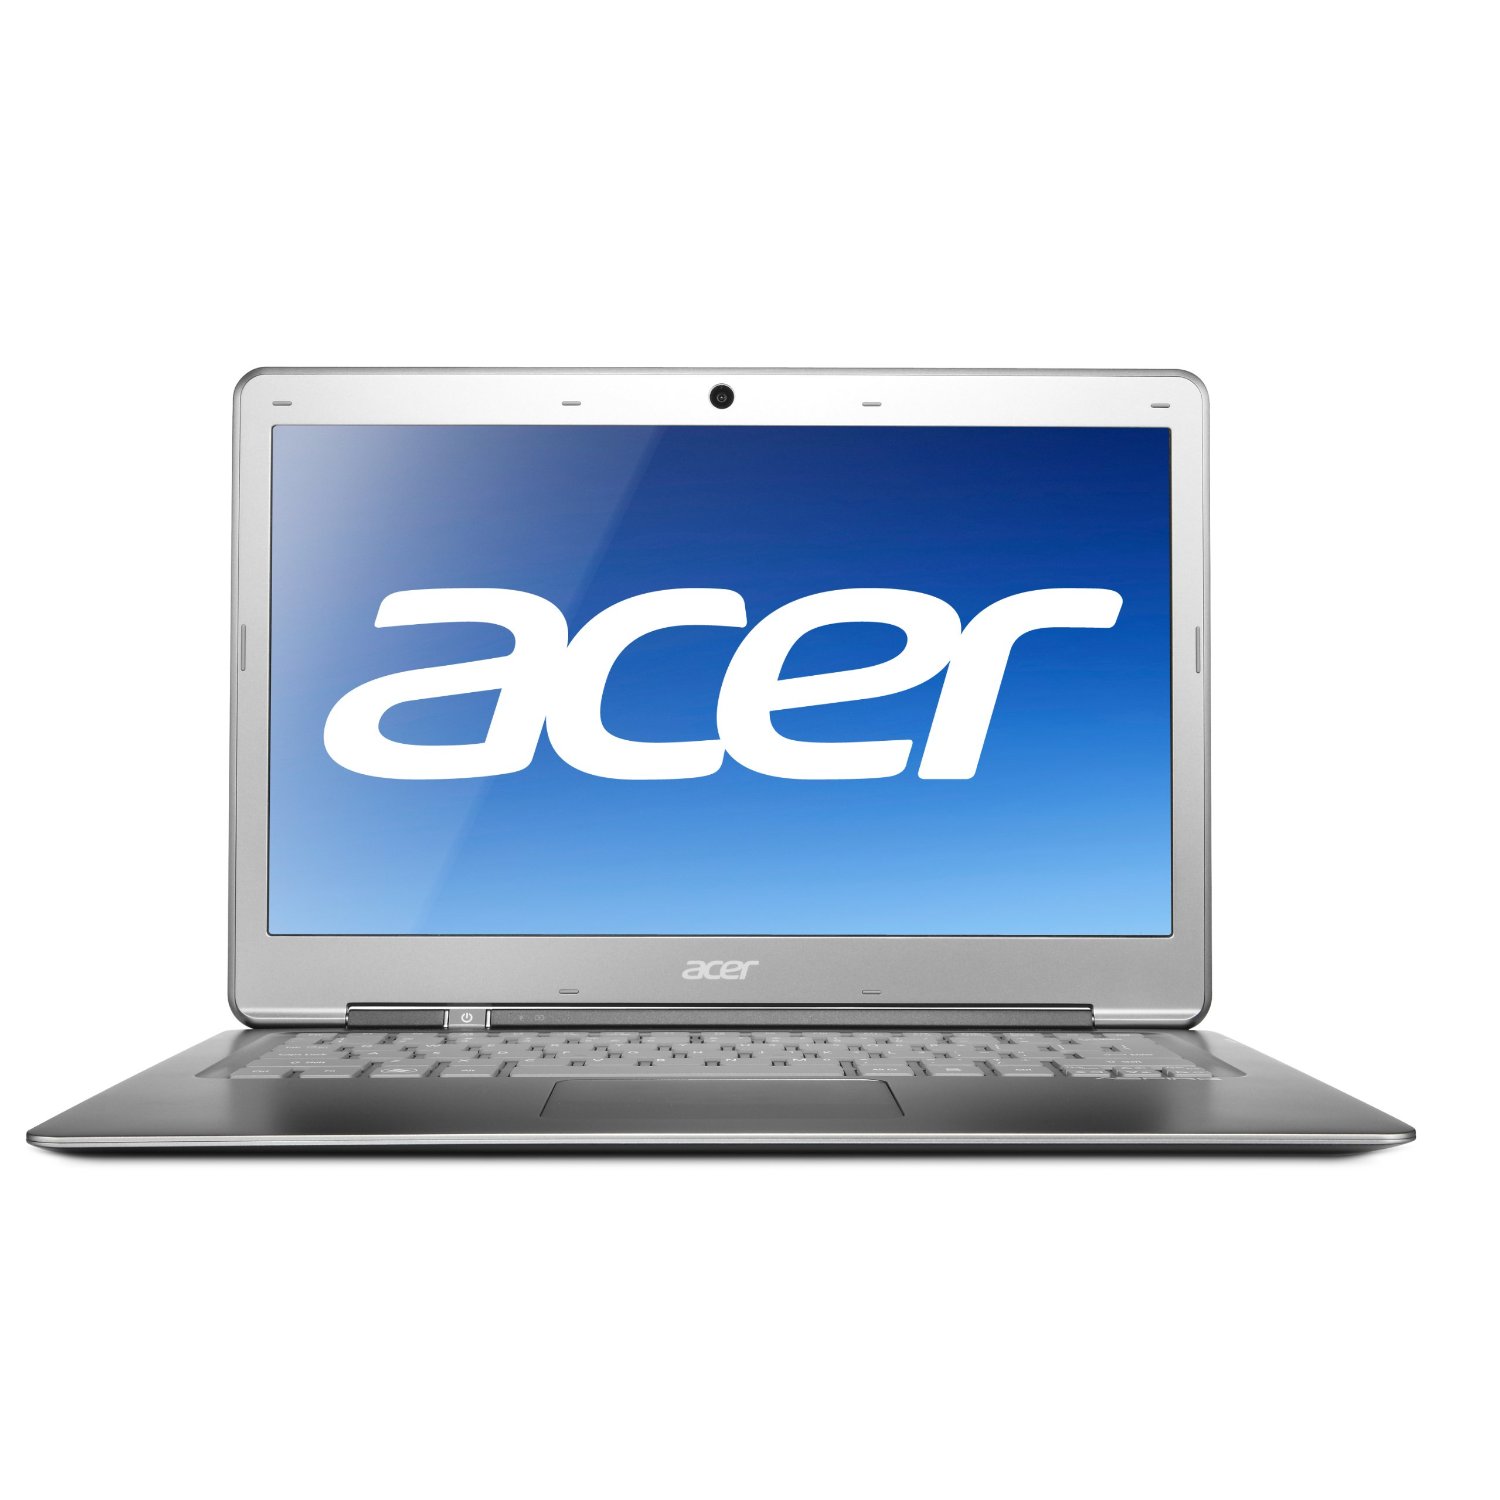 http://thetechjournal.com/wp-content/uploads/images/1111/1322192769-acer-aspire-s39516828-133inch-hd-display-ultrabook-1.jpg